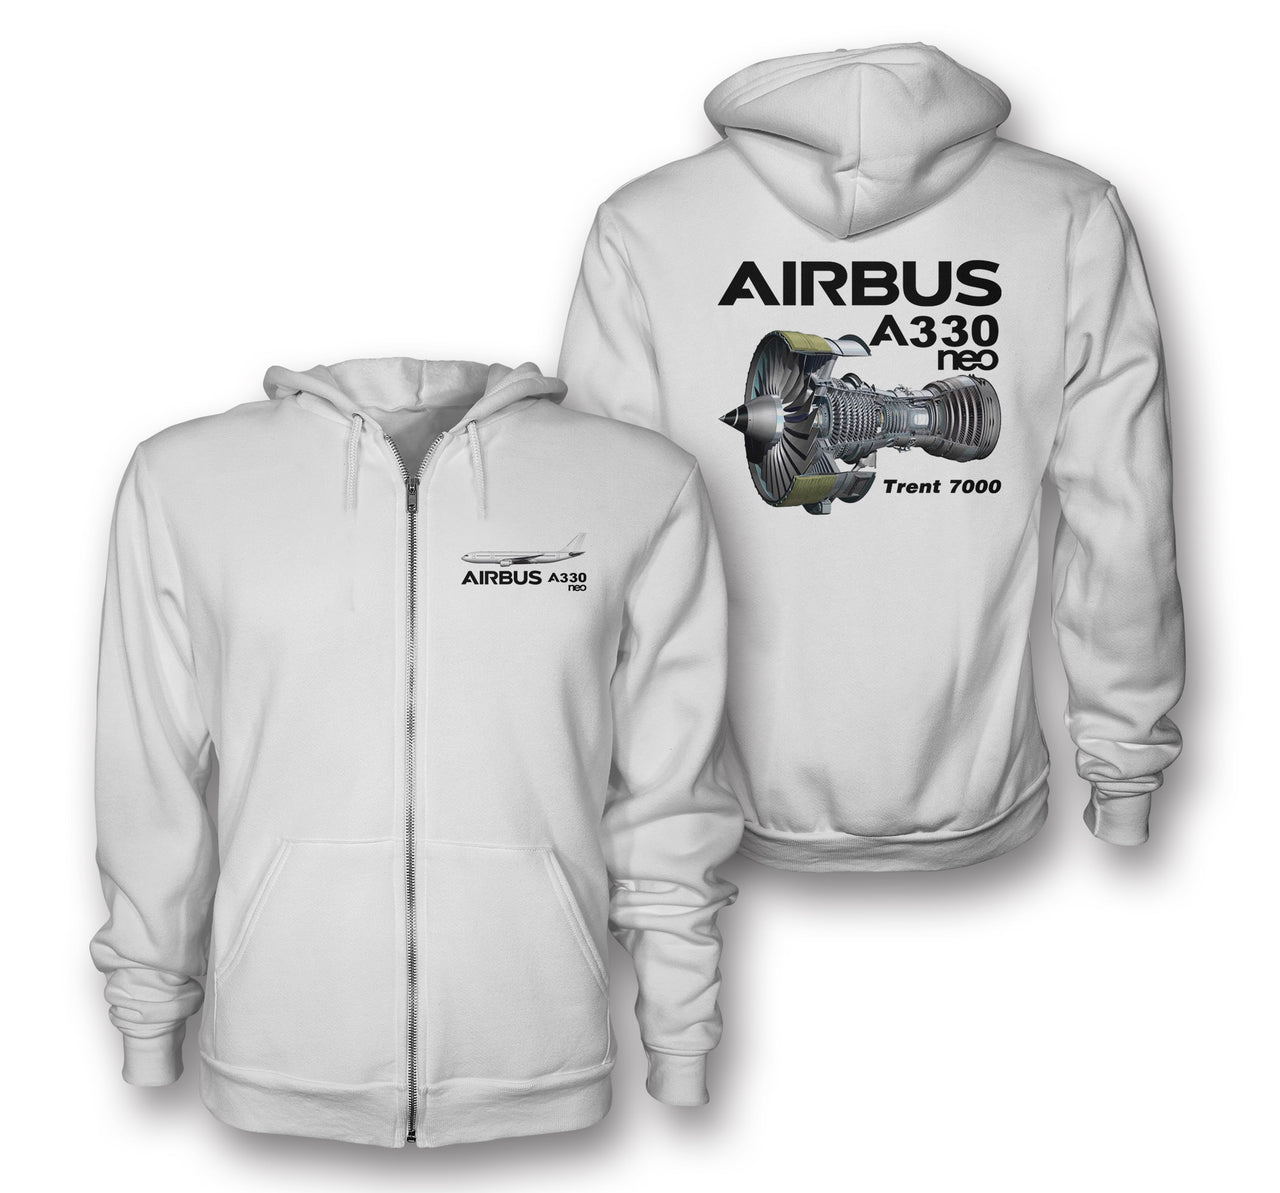 The Airbus A330neo & Trent 7000 Engine Designed Zipped Hoodies